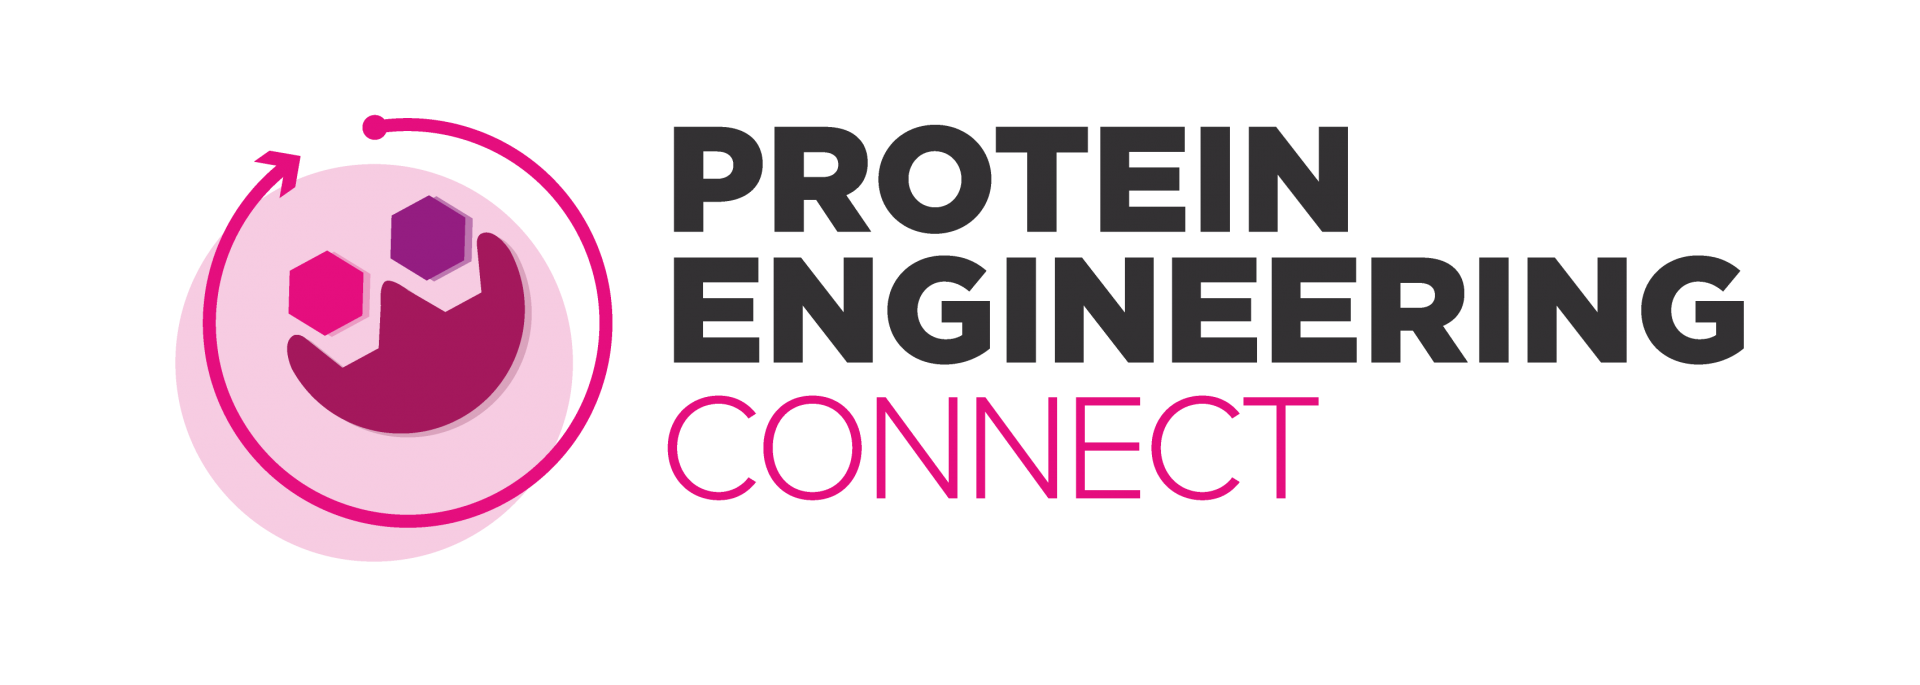 Protein Engineering Connect